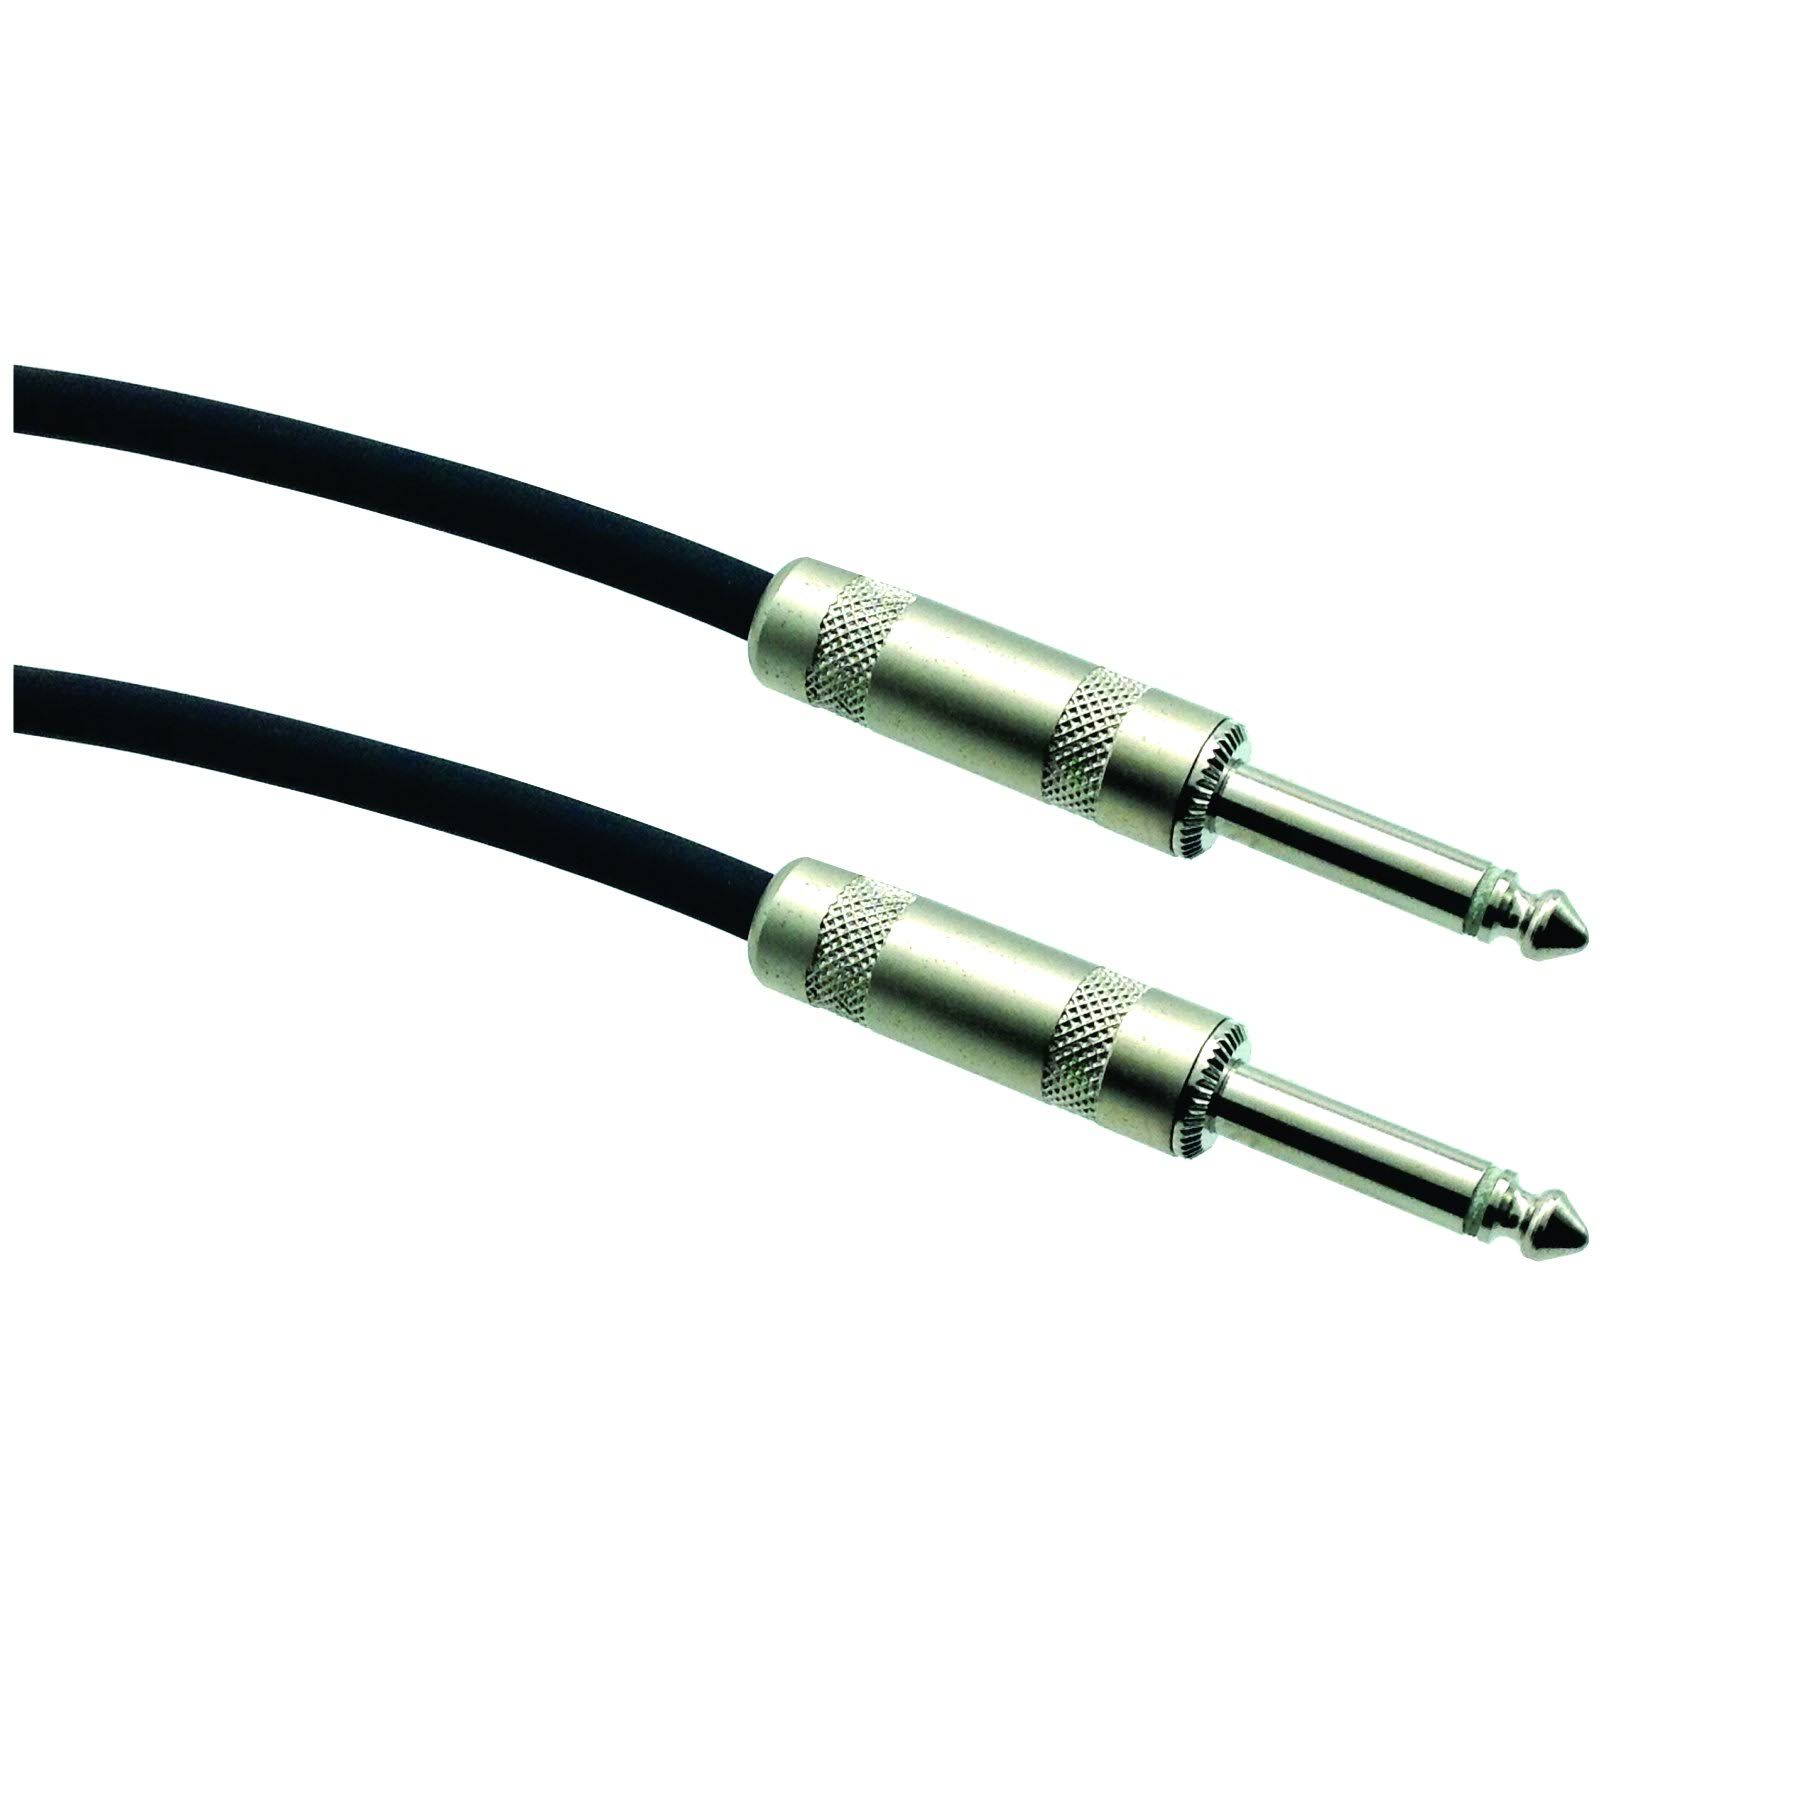 1/4" to 1/4" 2 Conductor, 16 AWG Pro Audio Speaker Cable 25 Feet